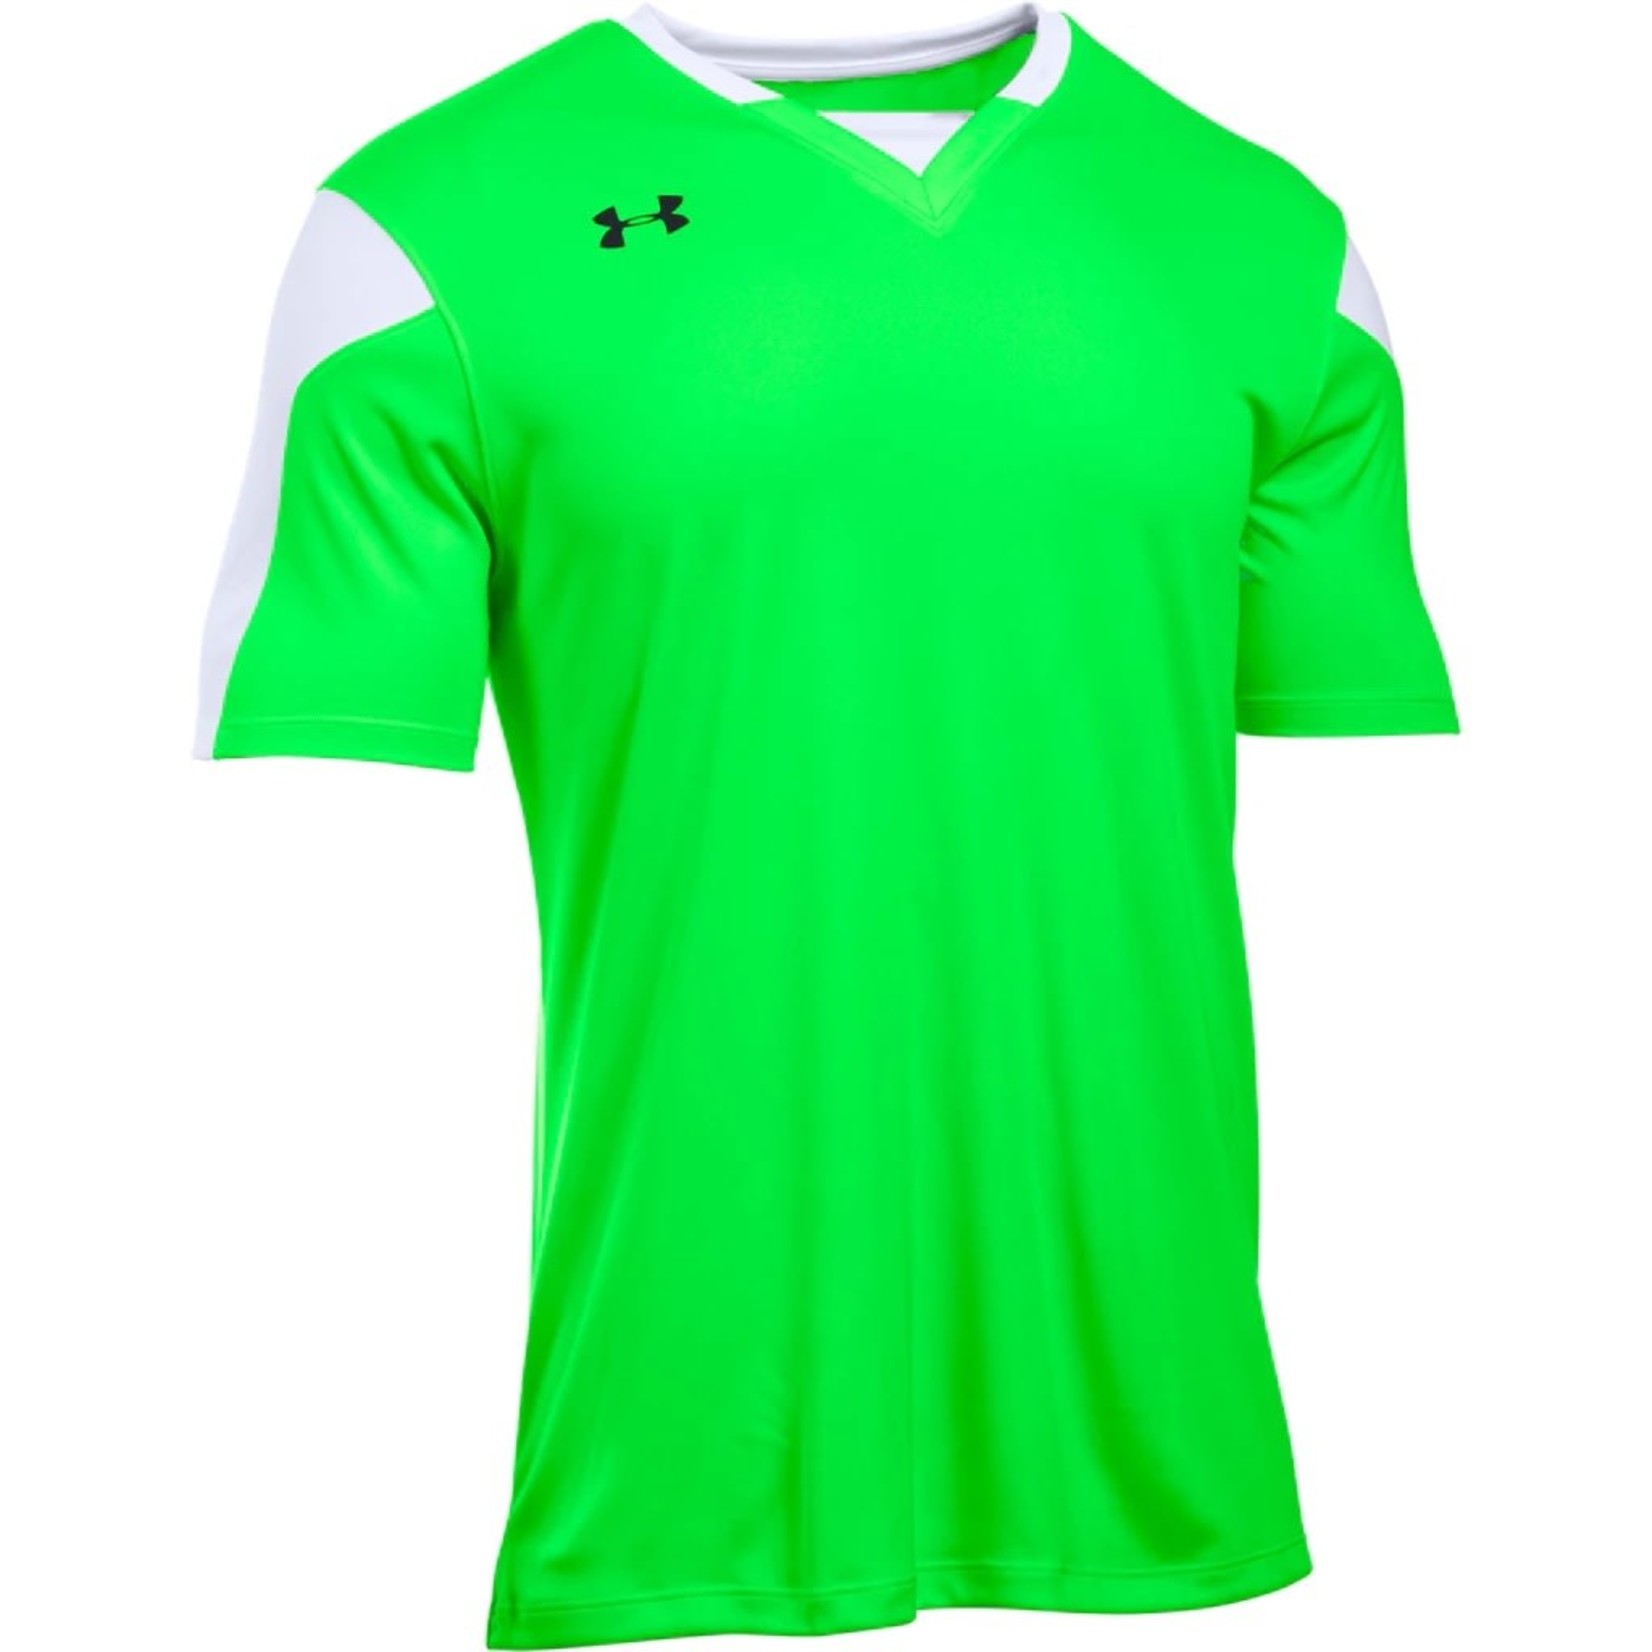 UNDER ARMOUR MAQUINA JERSEY YOUTH (LIME)